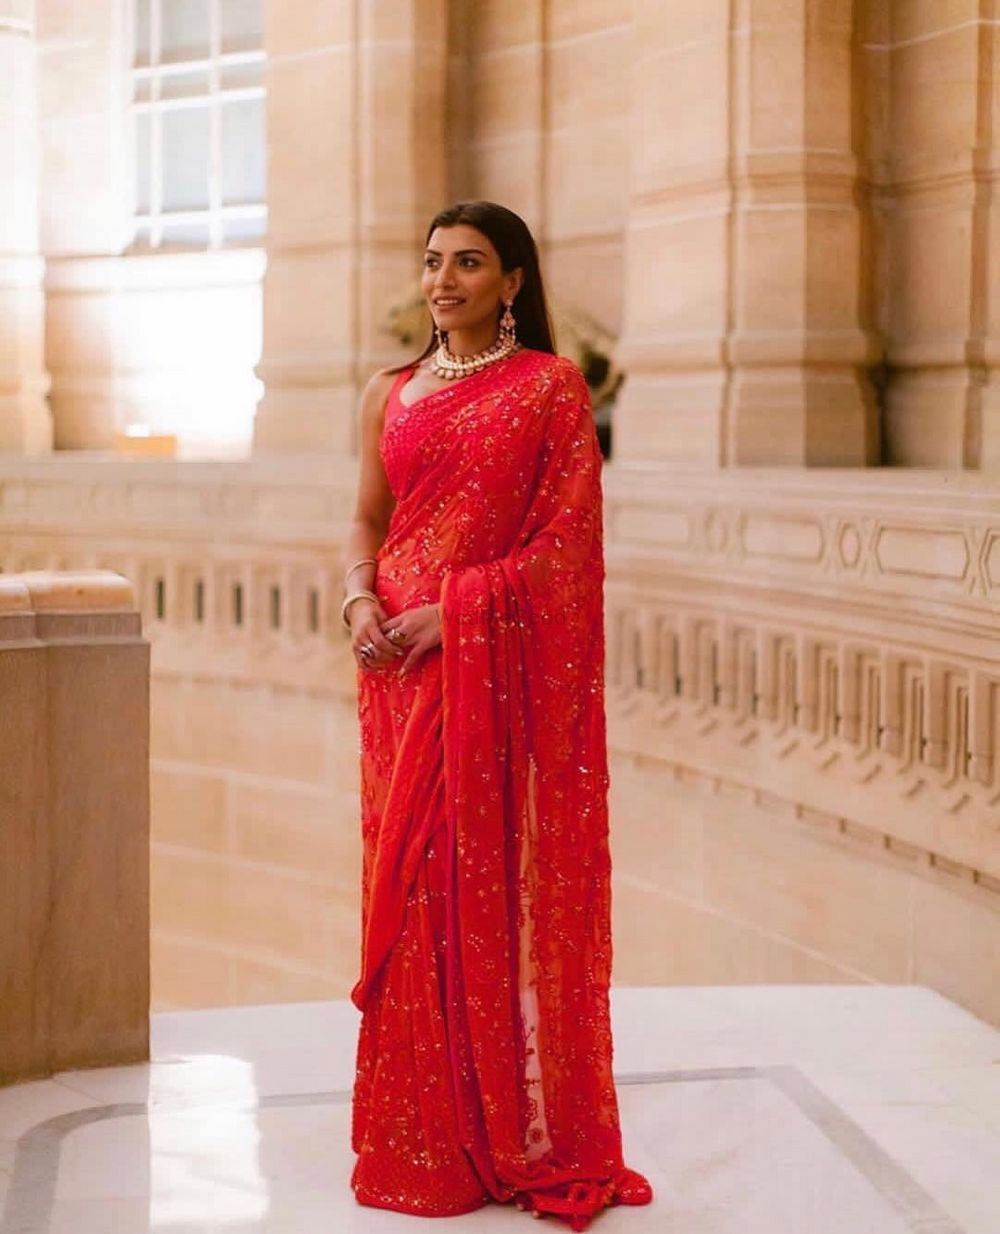 Photo of A friend of the bride in a sheer red saree